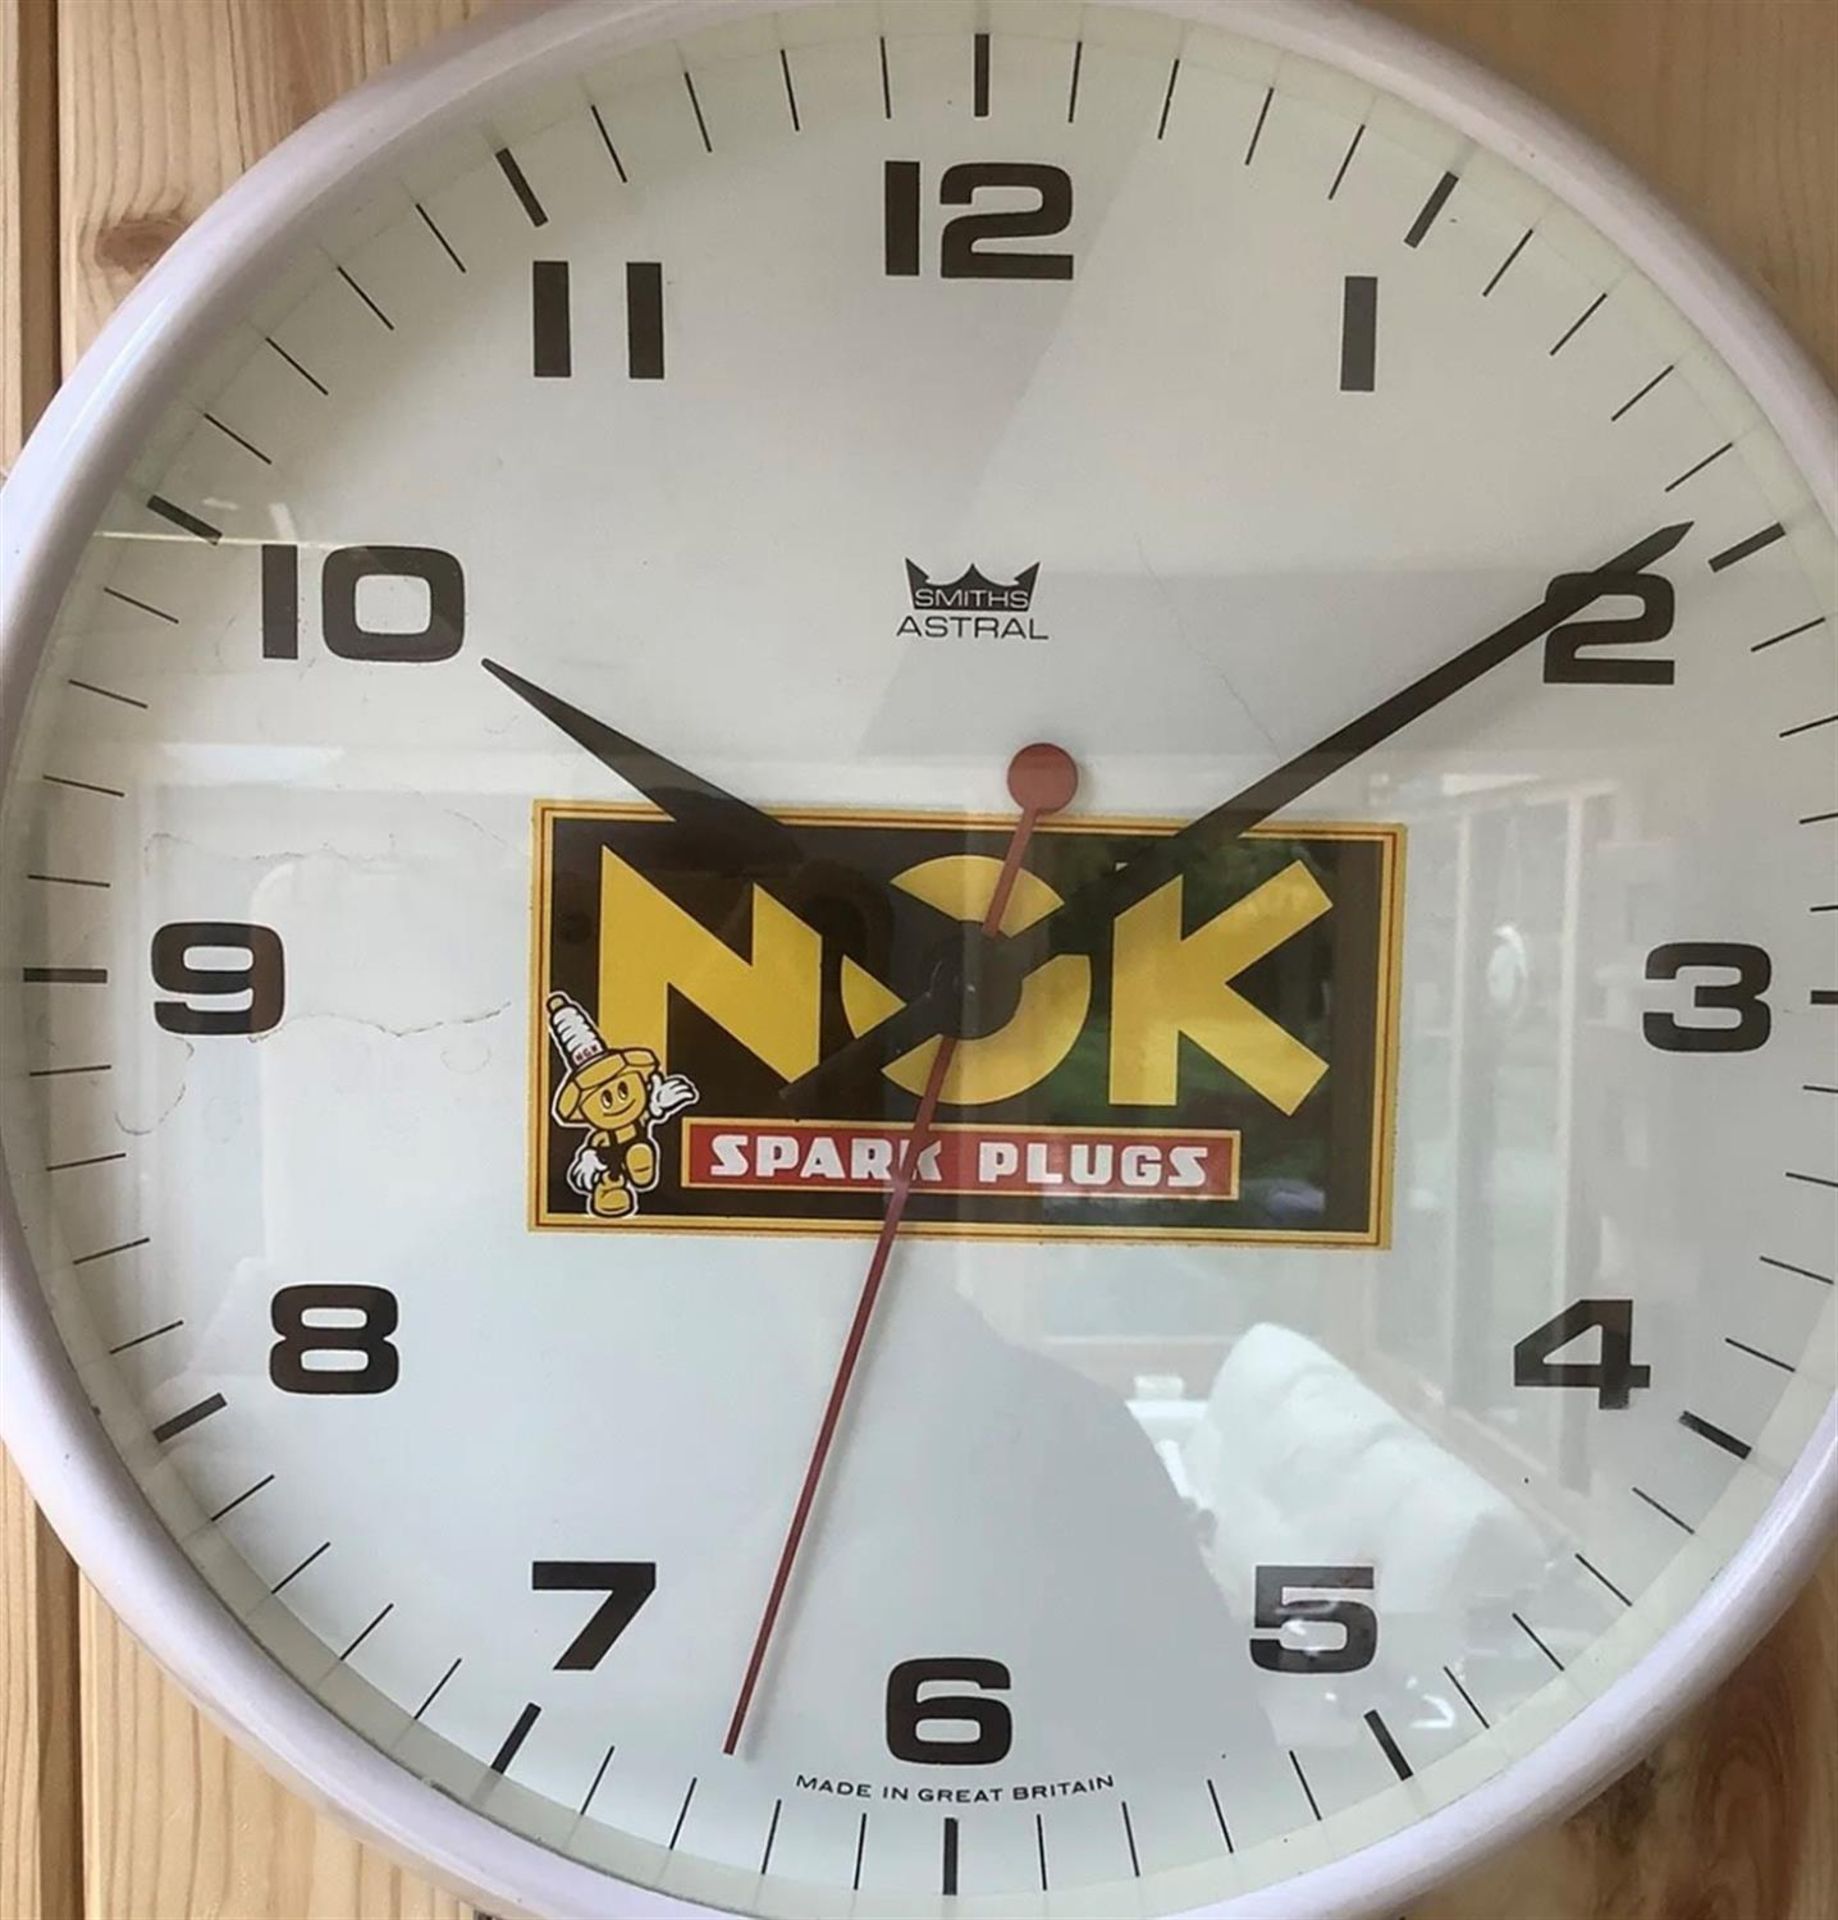 A Rare NGK Spark Plugs 14" Smiths Astral Dial Clock - Image 7 of 9